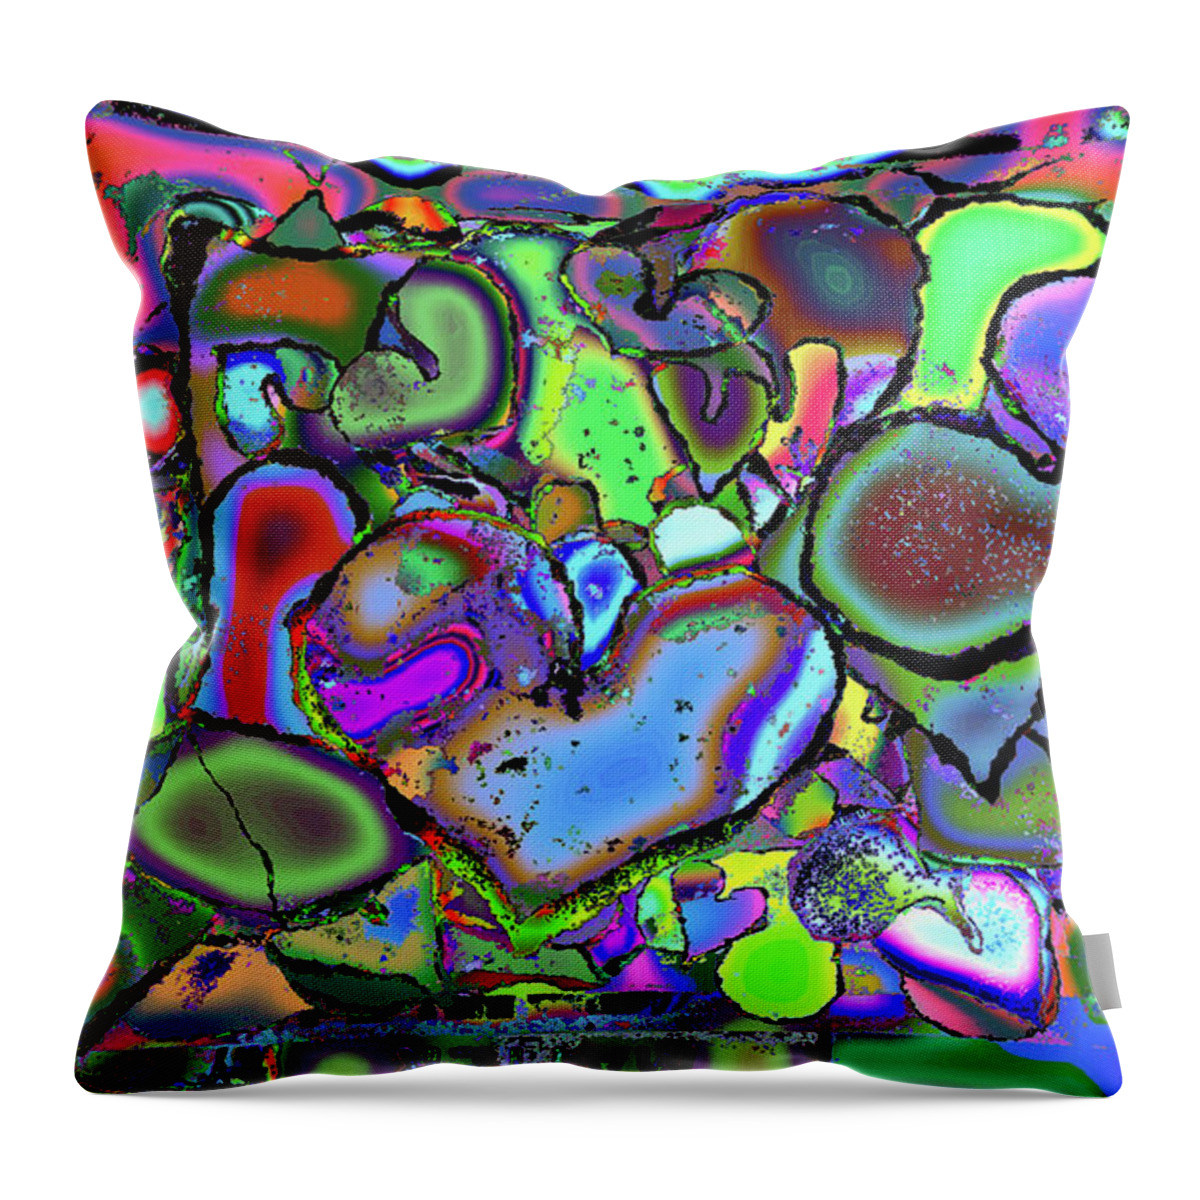 Eclectic Love Overflows Throw Pillow featuring the photograph Eclectic Love Overflows by Kenneth James